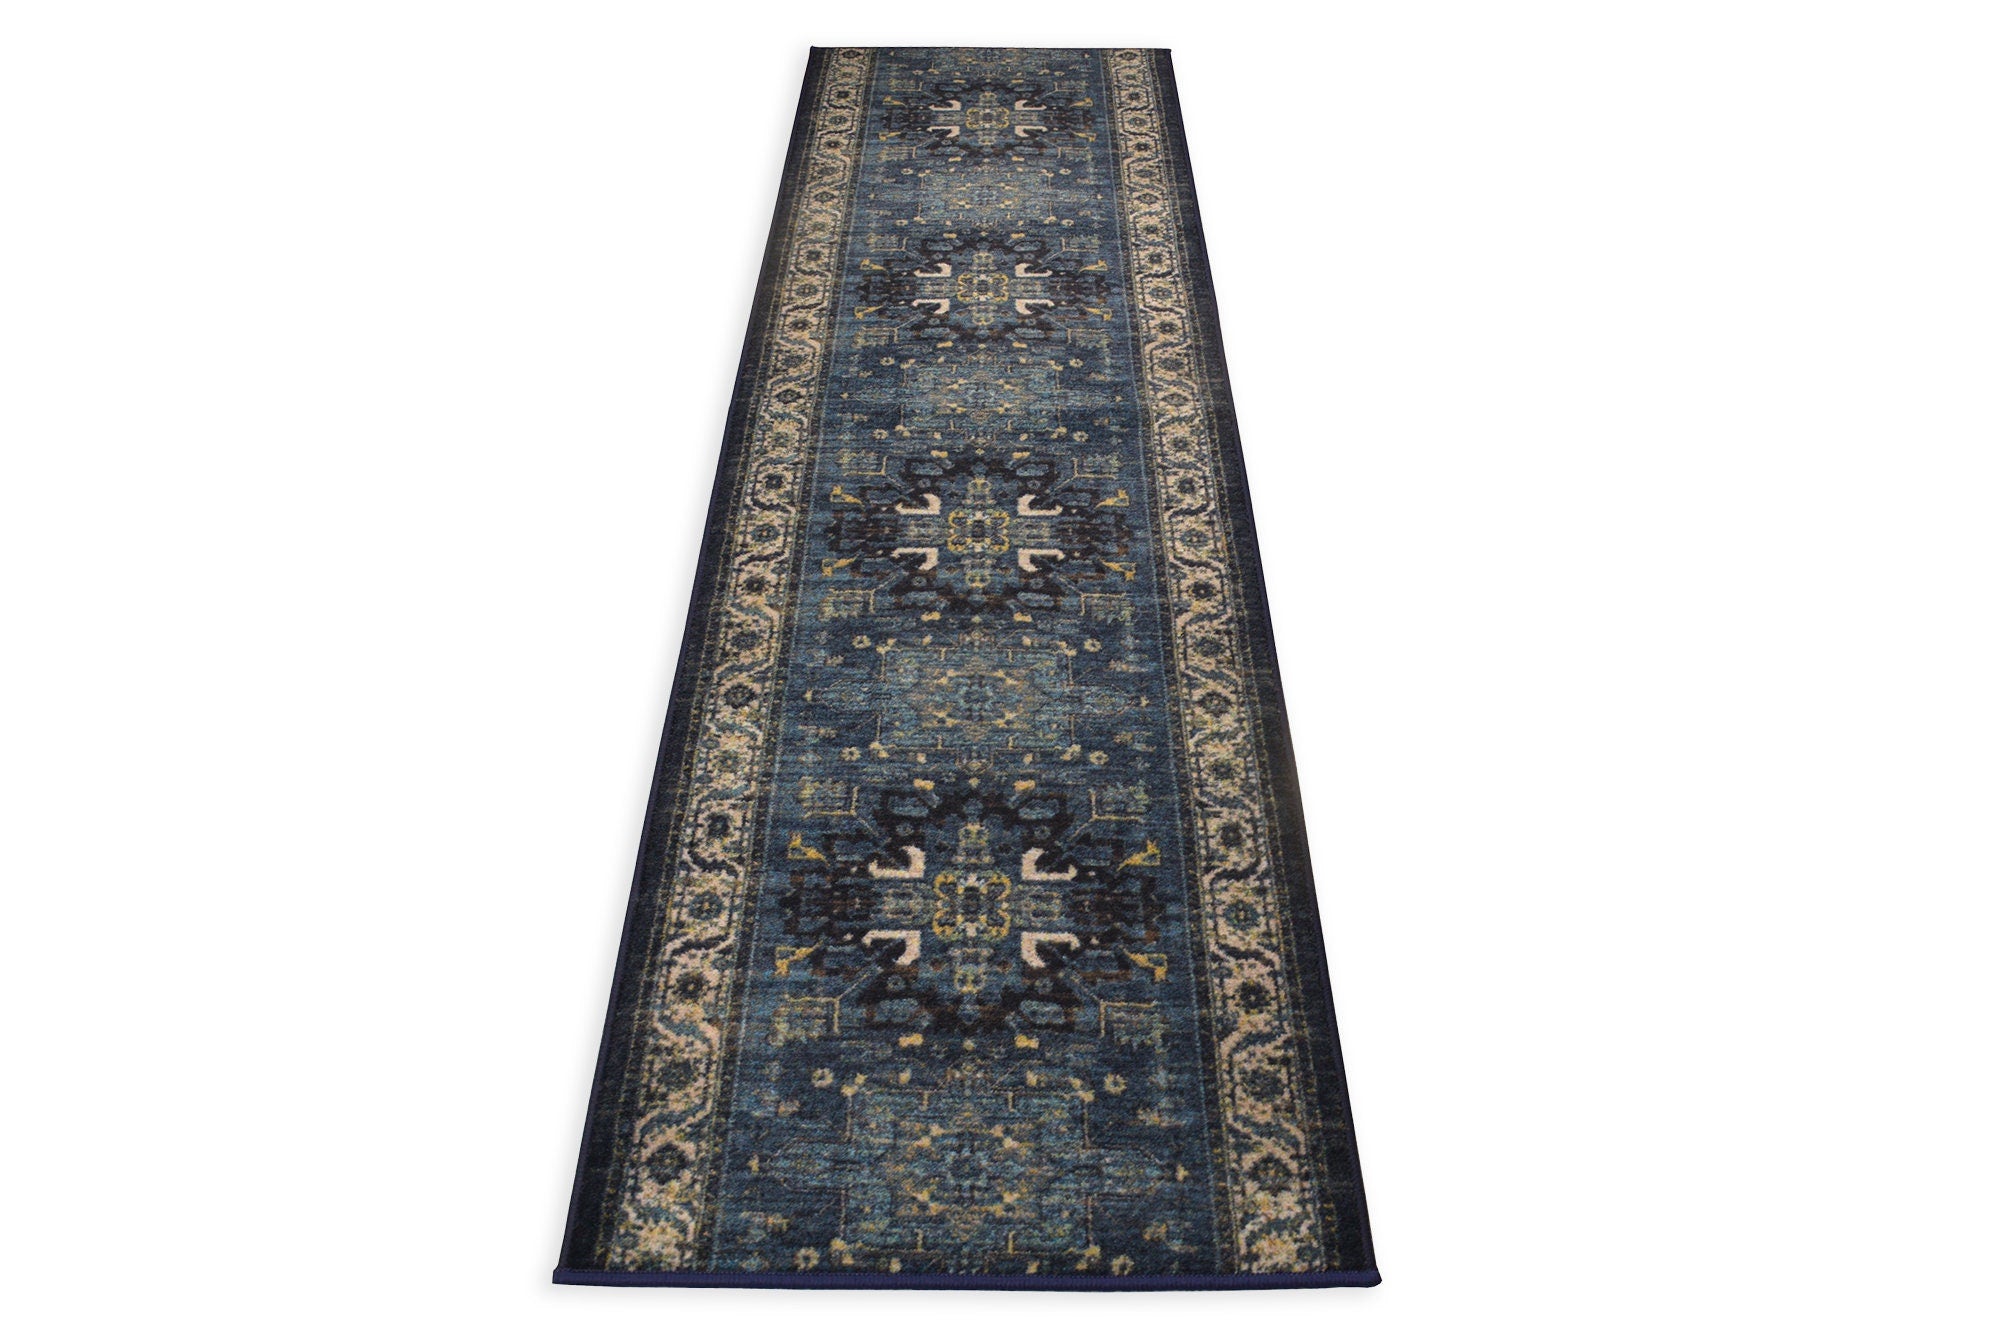 Custom Size Runner Rug Antique Persian Medallion Navy Blue Natural Cotton Backing Pick Your Own Size By Up to 50 Ft, Width 26" or 35" - 0